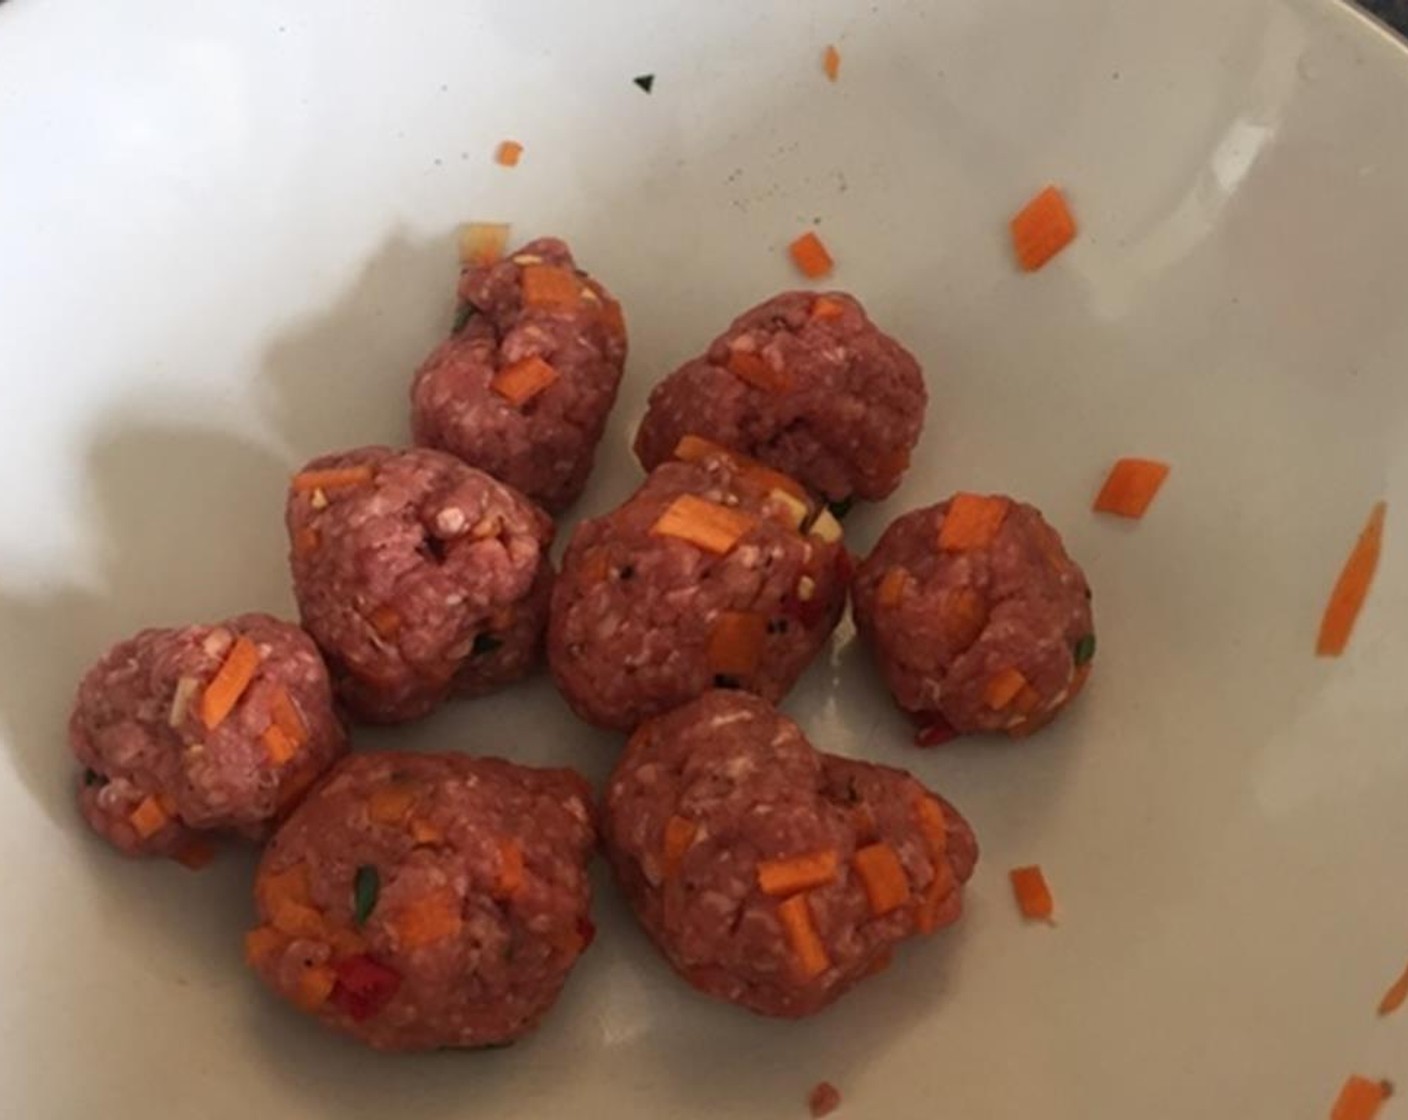 step 1 Put the Ground Beef (3.5 oz), Carrot (1/2), Fresh Ginger (1 piece), Red Bird's Eye Chili Pepper (1), Fresh Parsley (1 handful), and Kaffir Lime Leaf (1) in a bowl and then scrunch it all up to combine and shape into little meatballs.